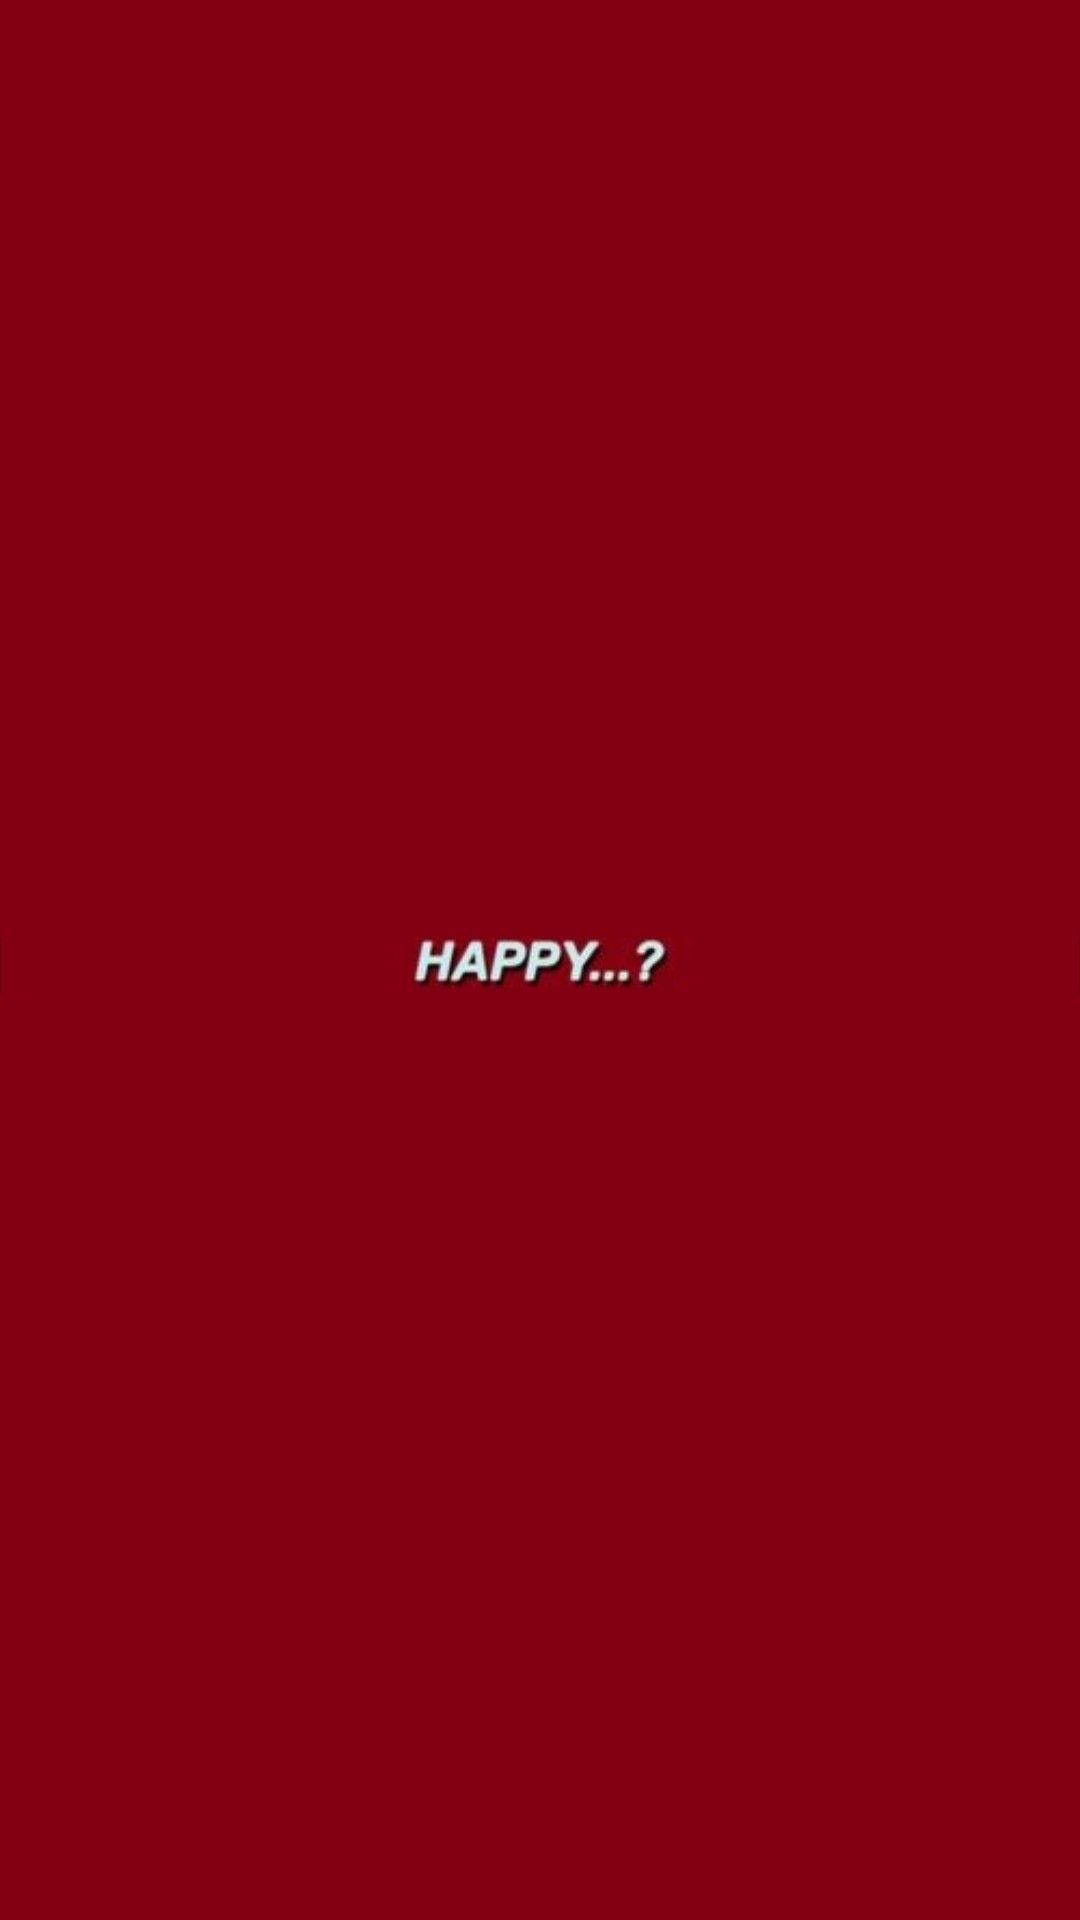 The happy 7 wallpaper - Light red, red